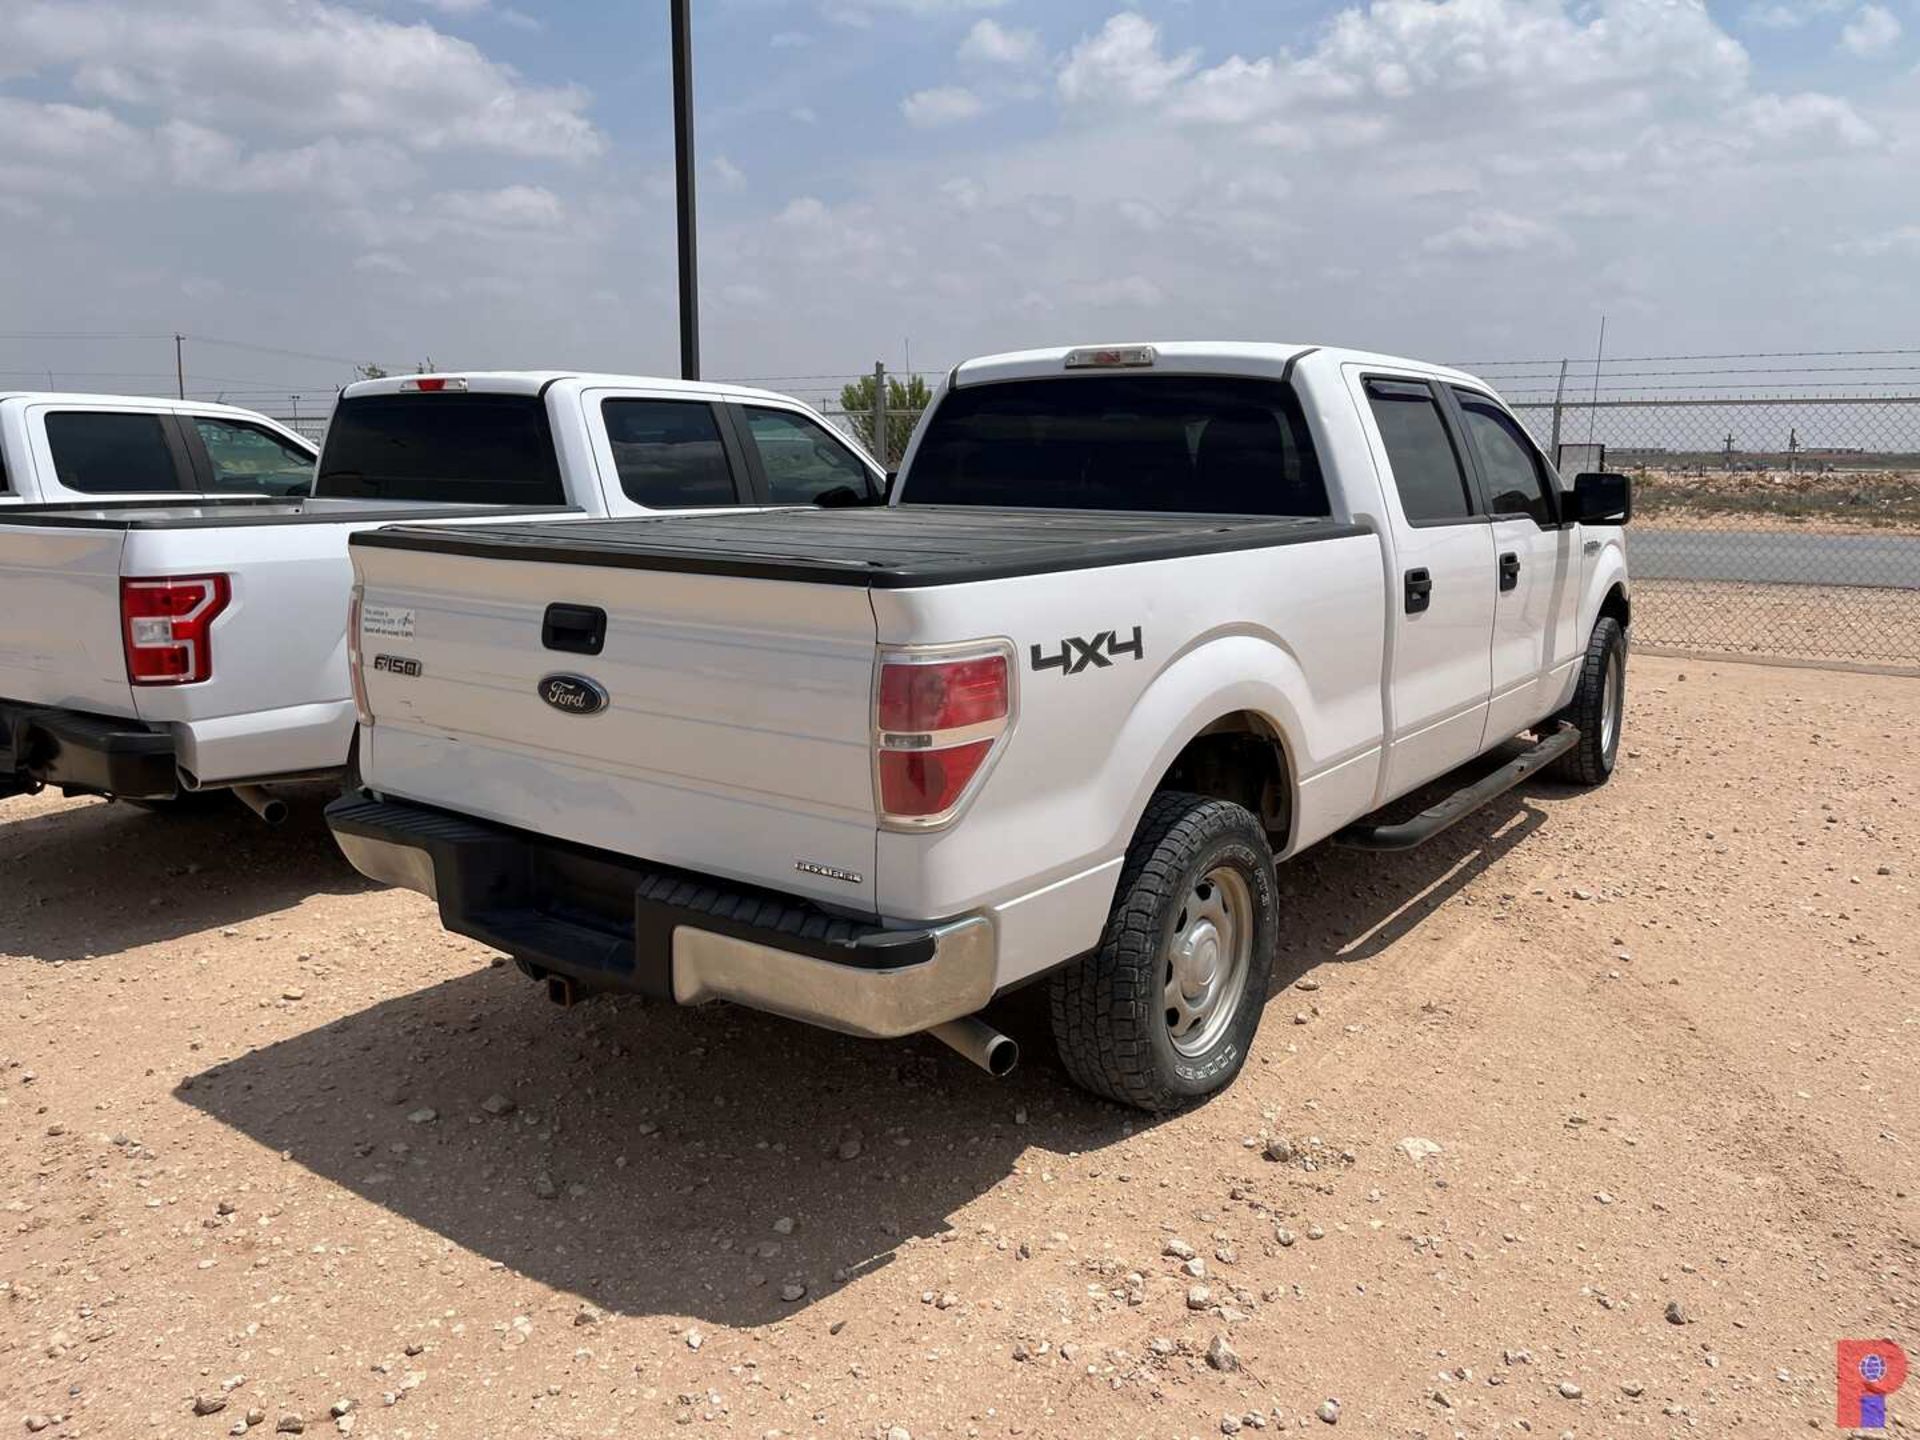 2014 FORD F-150 CREW CAB PICKUP TRUCK - Image 3 of 7